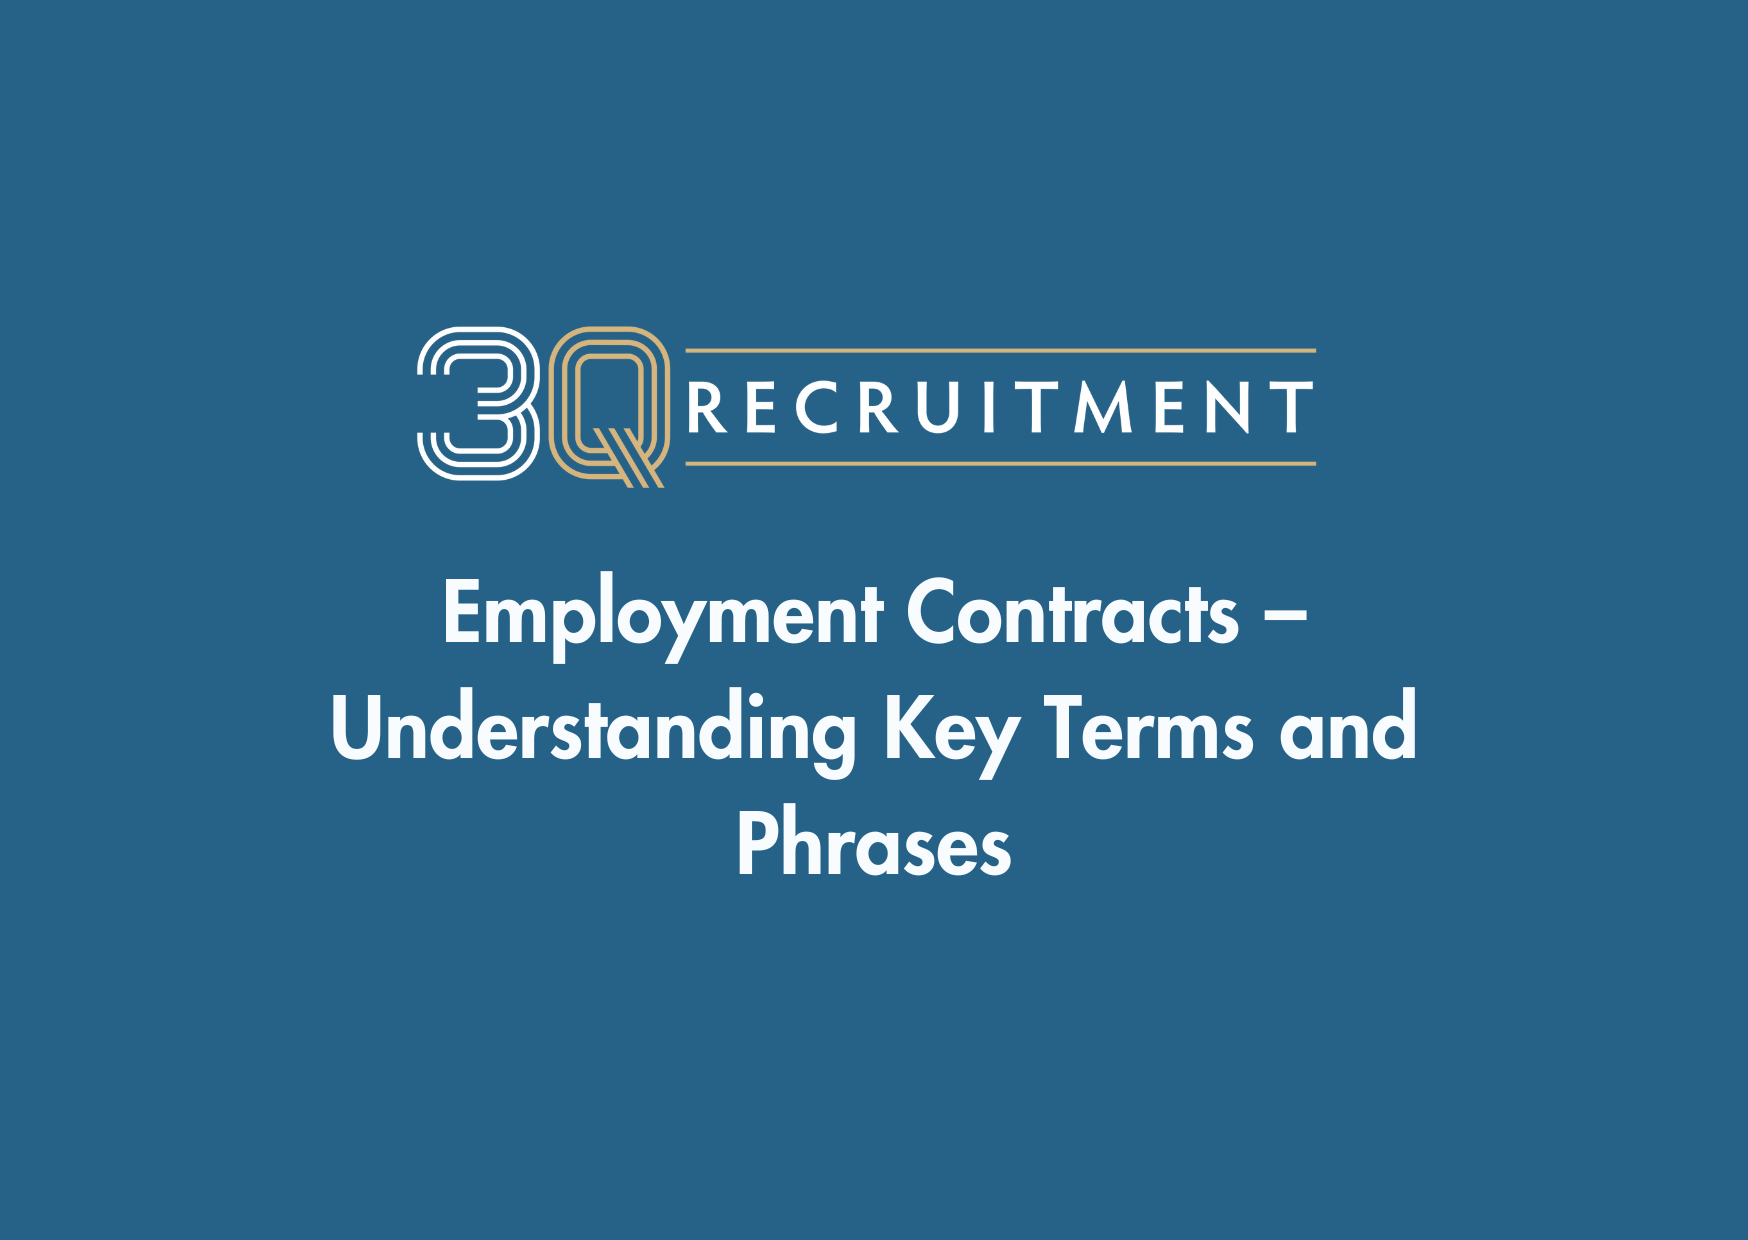 3Q Recruitment Employment Contracts – Understanding Key Terms and Phrases